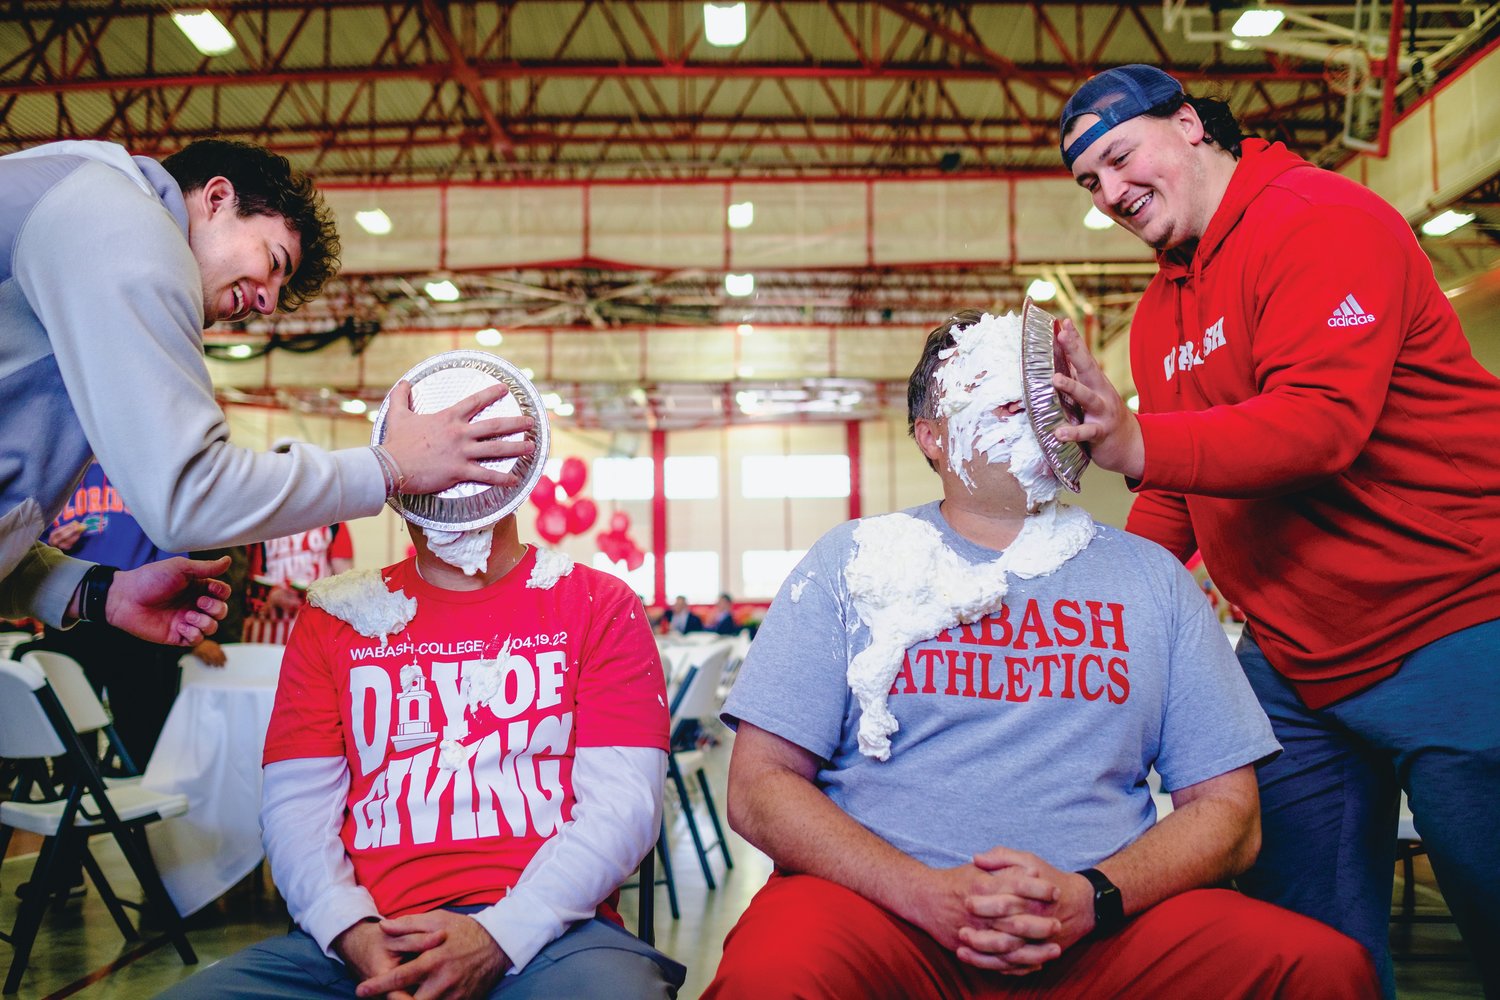 Head Basketball Coach Kyle Brumett, left, and Assistant Football Coach Olmy Olmstead ’04 won the raffle to get a pie in the face from students to celebrate the Day of Giving at an all-campus lunch April 19.